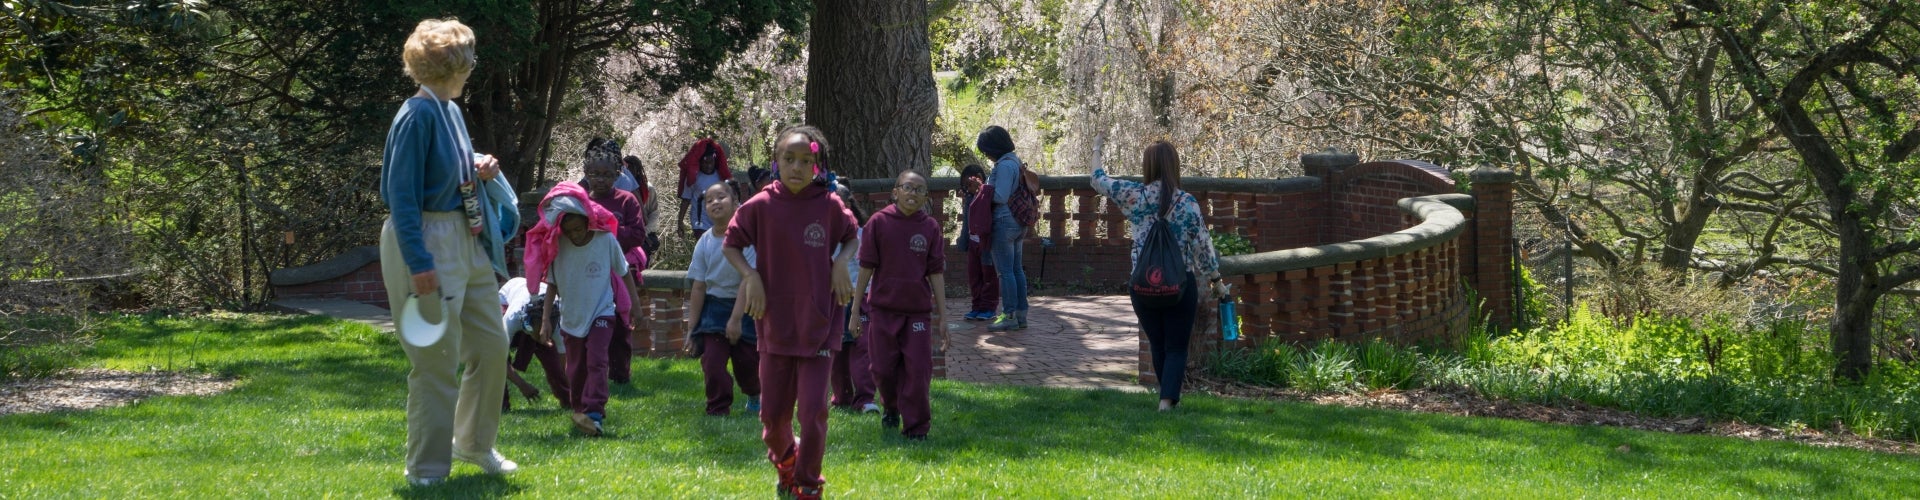 A group of students are led on a tour of a public garden in spring. 